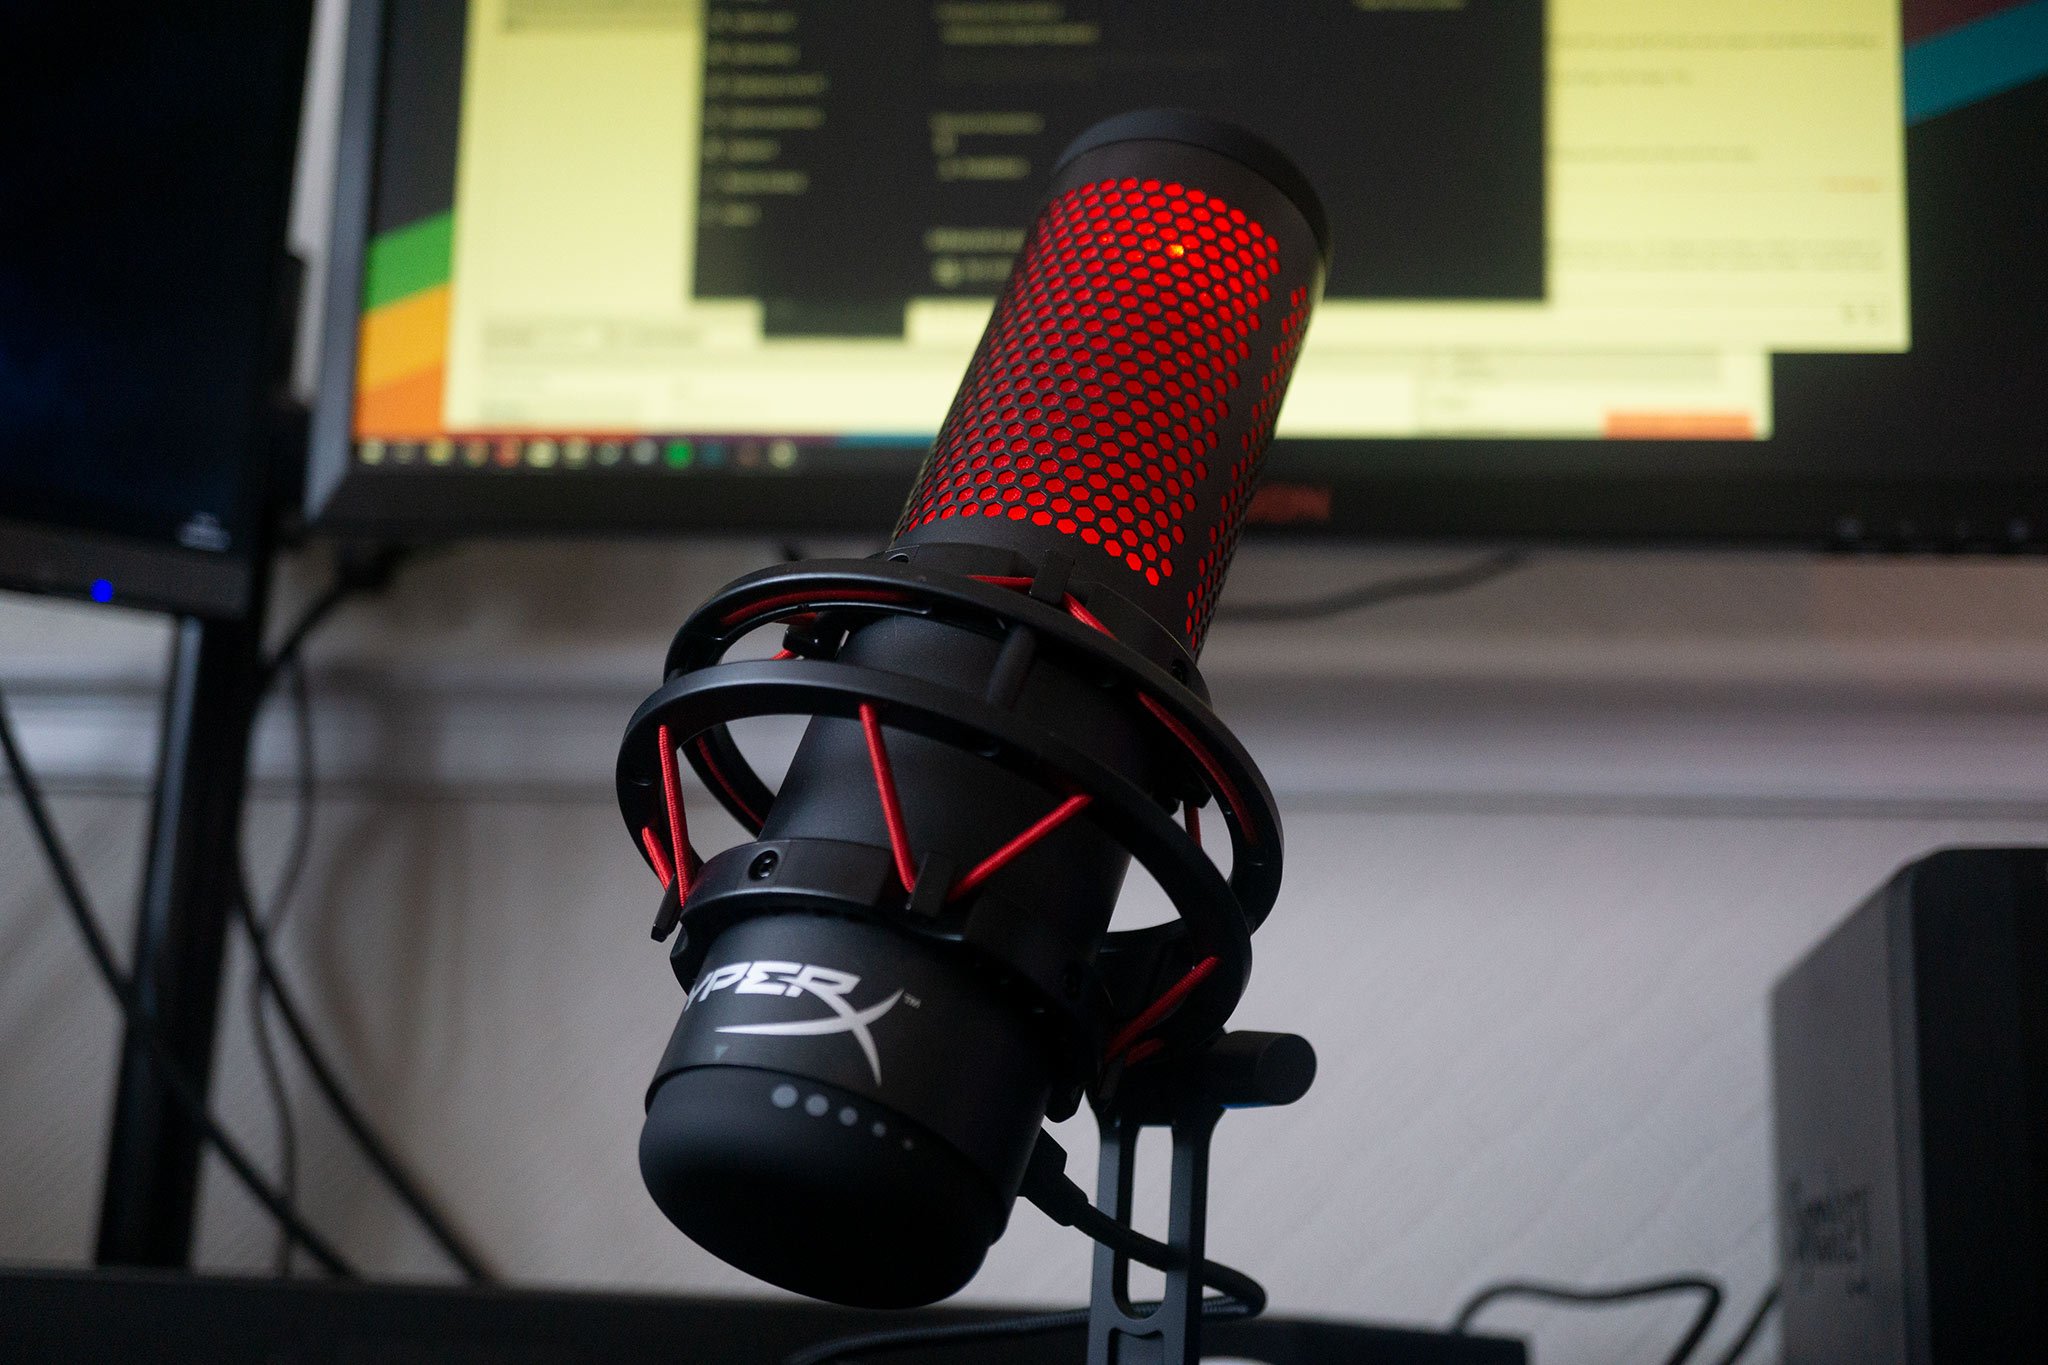 HyperX QuadCast microphone review: Great value for gamers and